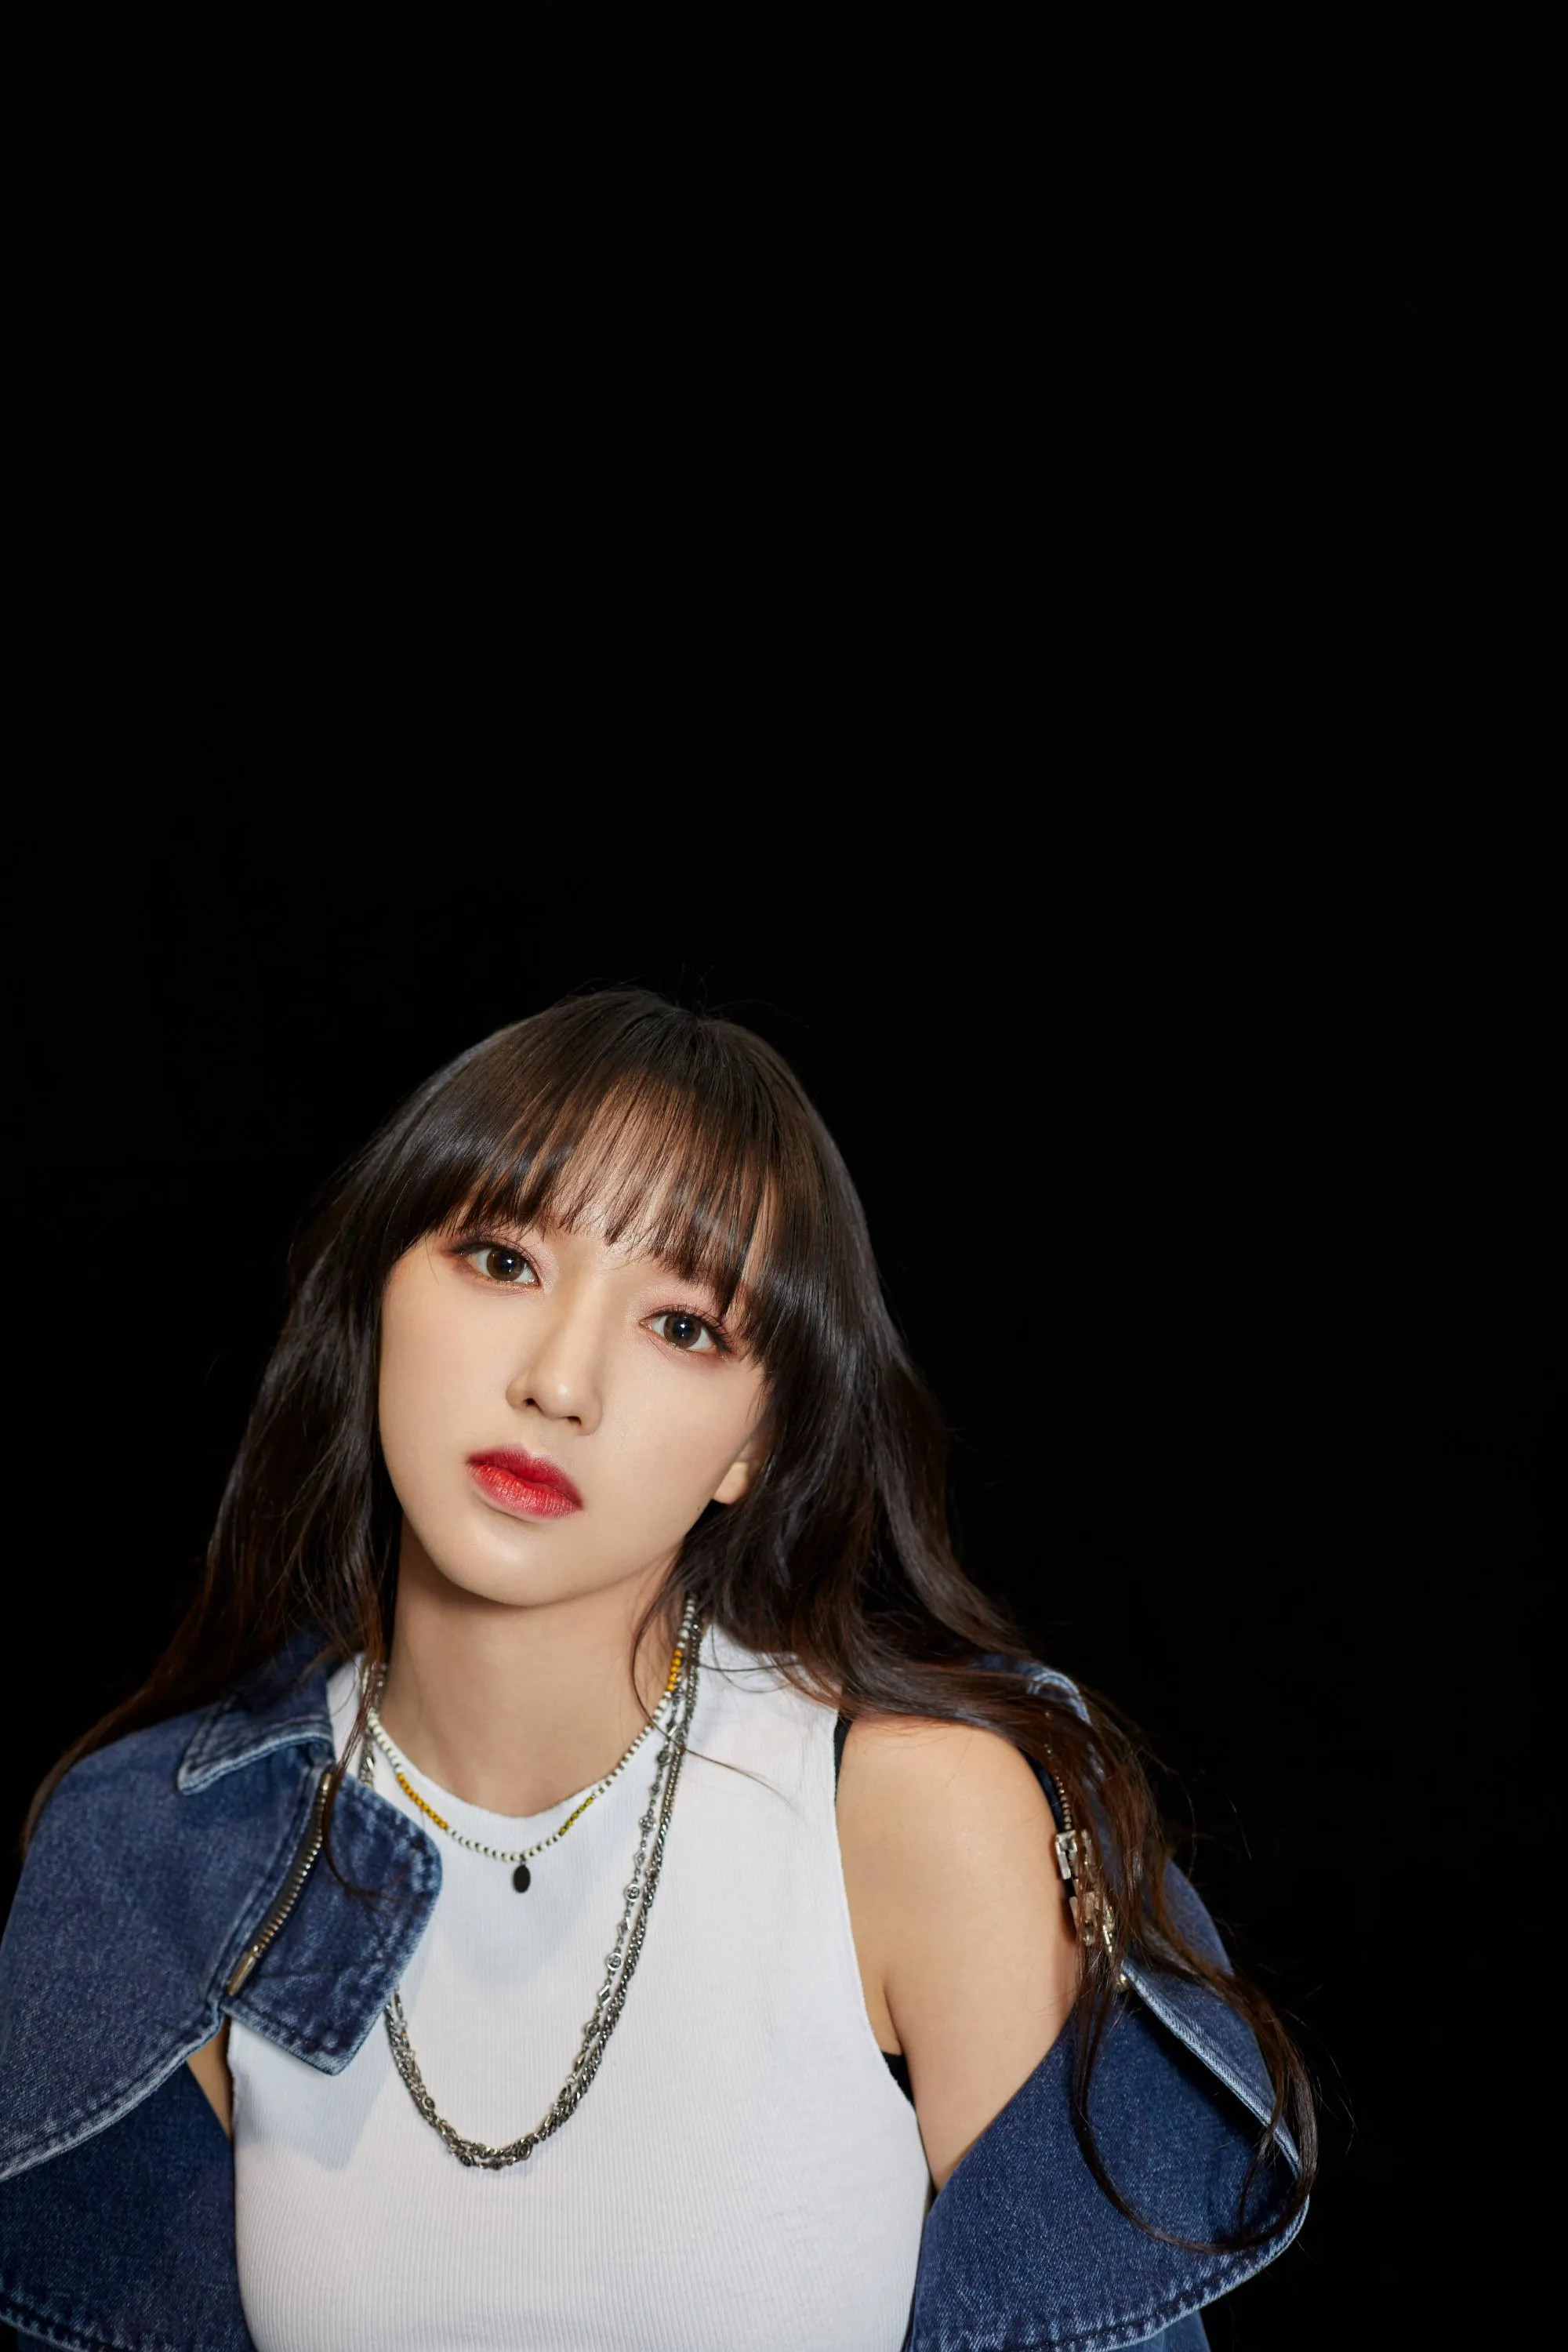 Cheng Xiao - 'Extreme Youth' promotion photos | kpopping